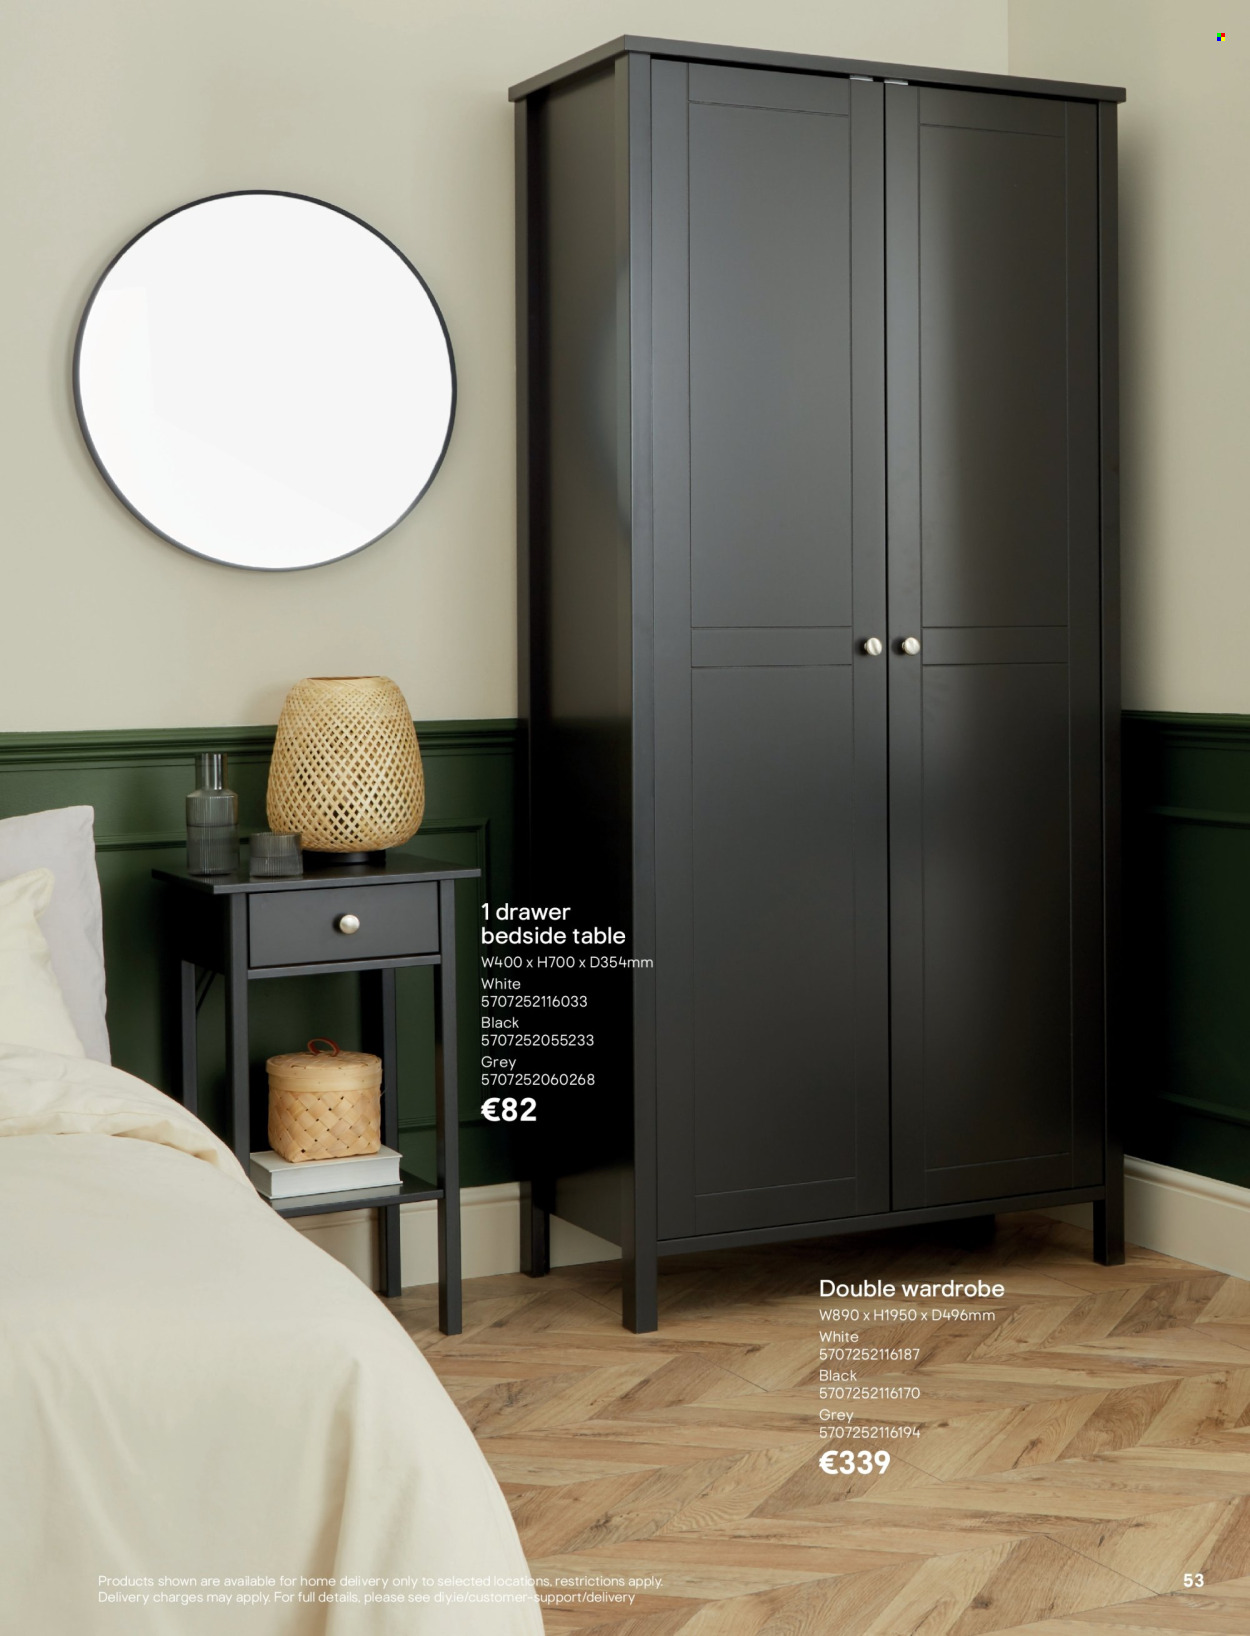 B&Q offer  - Sales products - table, wardrobe, bedside table. Page 53.